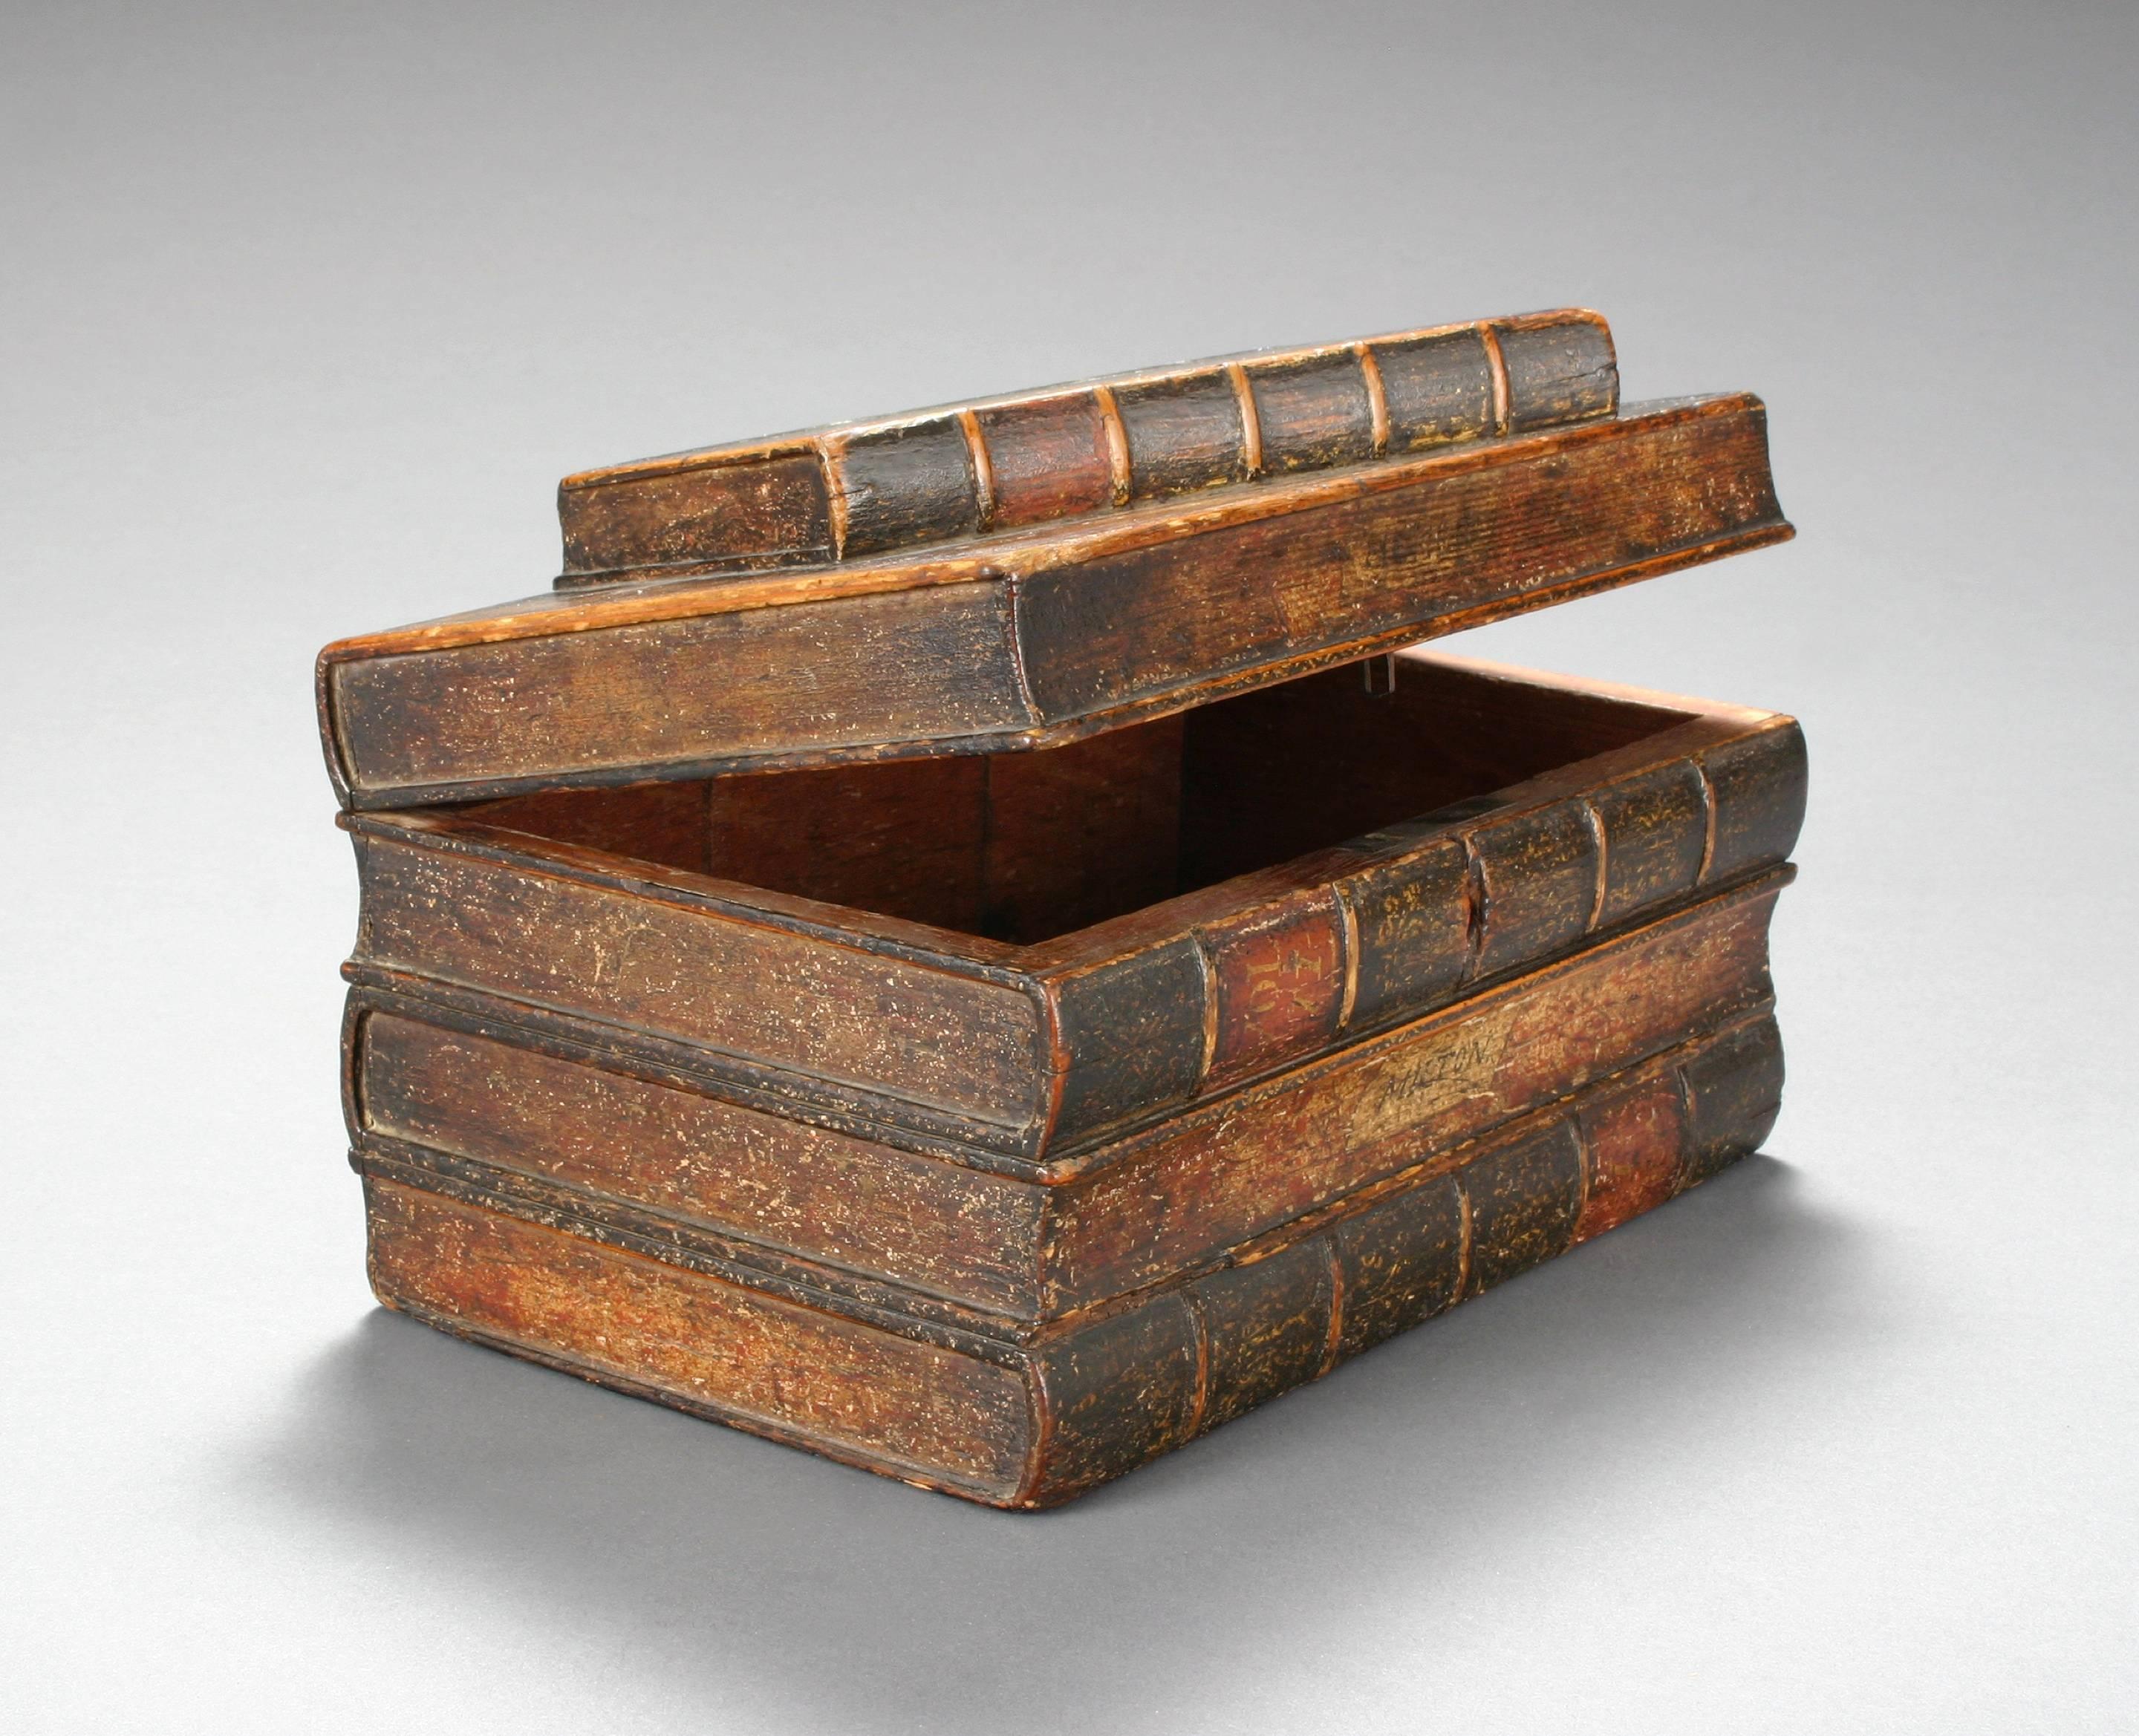 Delightful, clever tromp l'oeil box created to resemble a stack of old books.

Illustrated, Antiquities and Collecting magazine, Book Form Furniture, June 2008, p. 39.

Wonderful mellow antique condition with lovely aged patina, ready to add to your